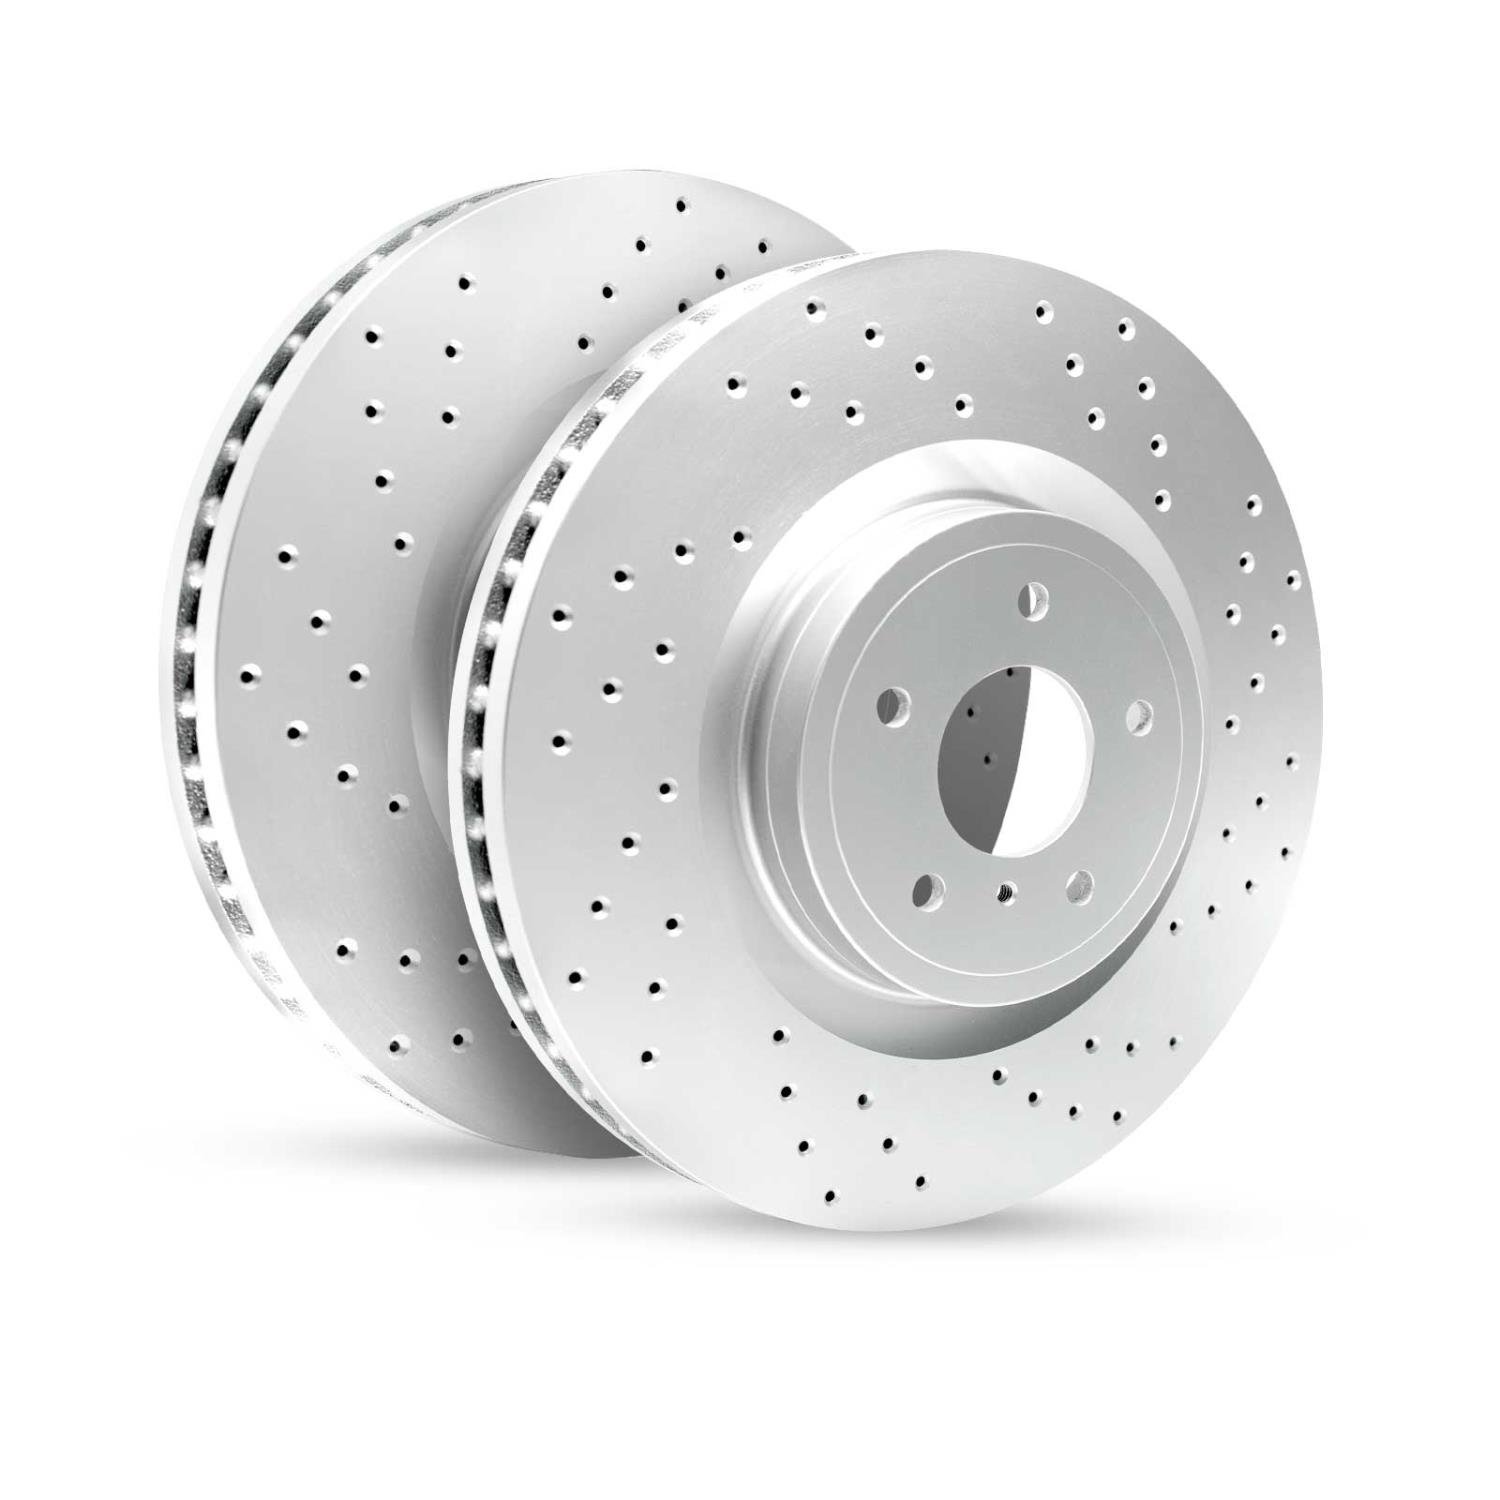 GEO-Carbon Drilled/Slotted Rotors, 1991-2001 Fits Multiple Makes/Models, Position: Front